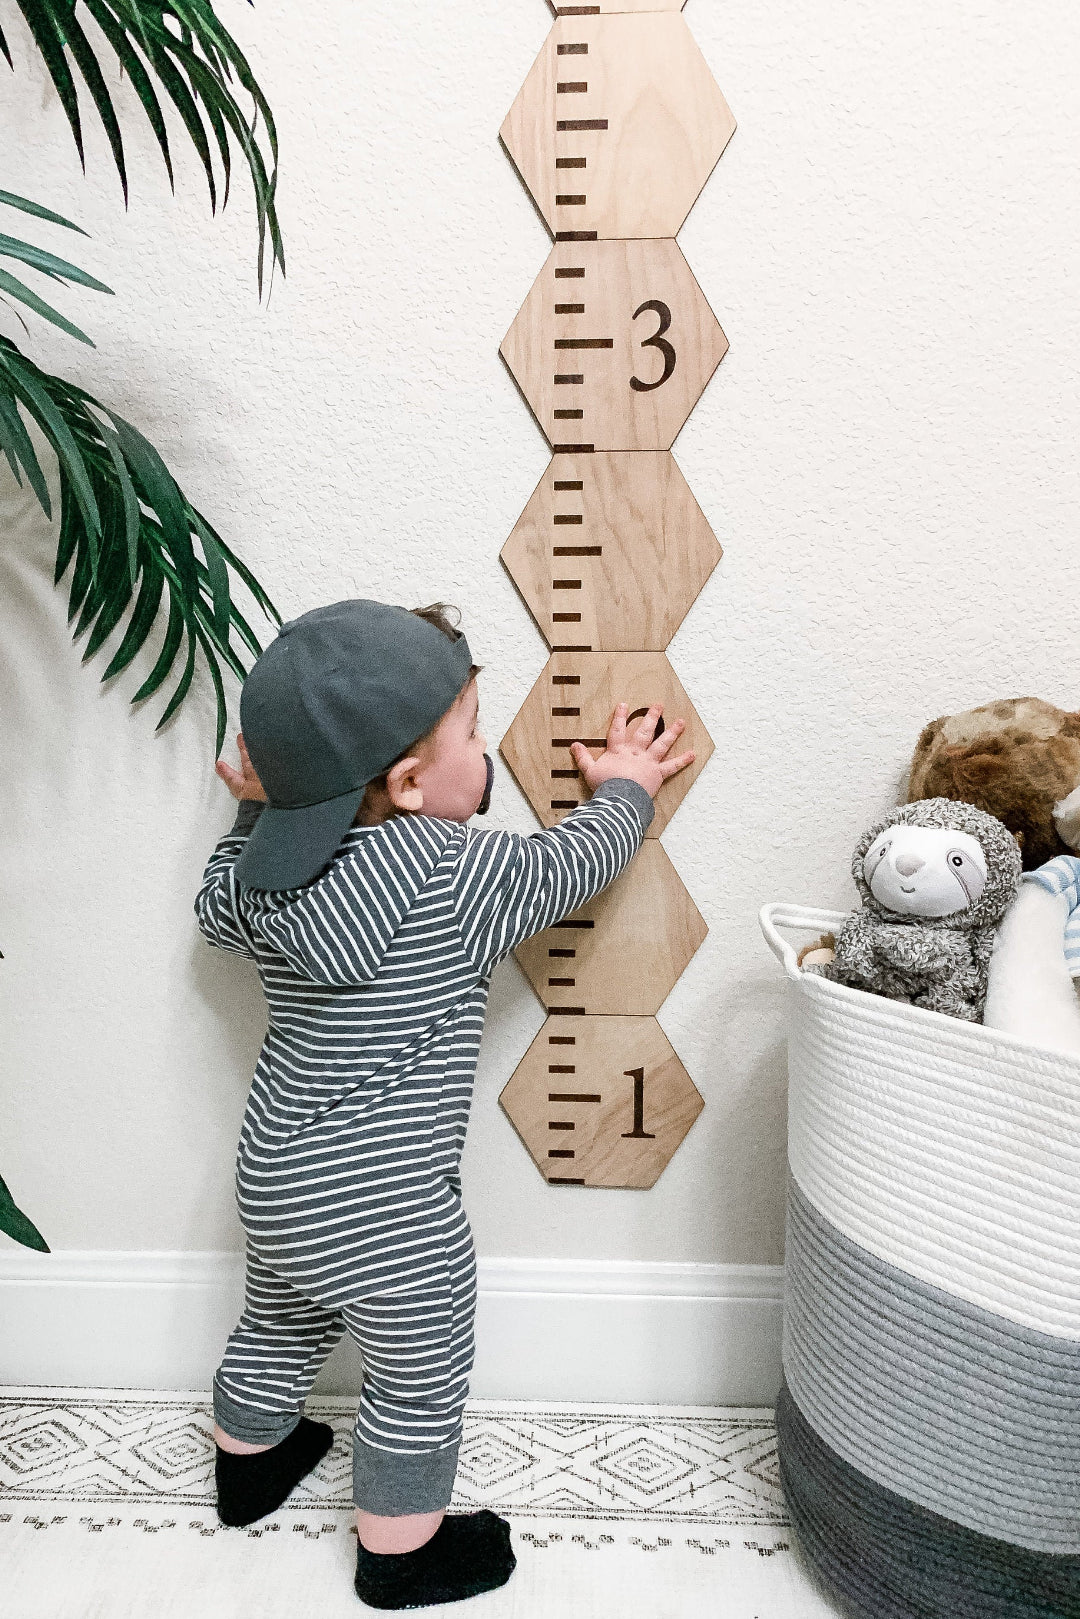 Wooden Hexagonal Patchwork Growth Chart For Kids and a Baby